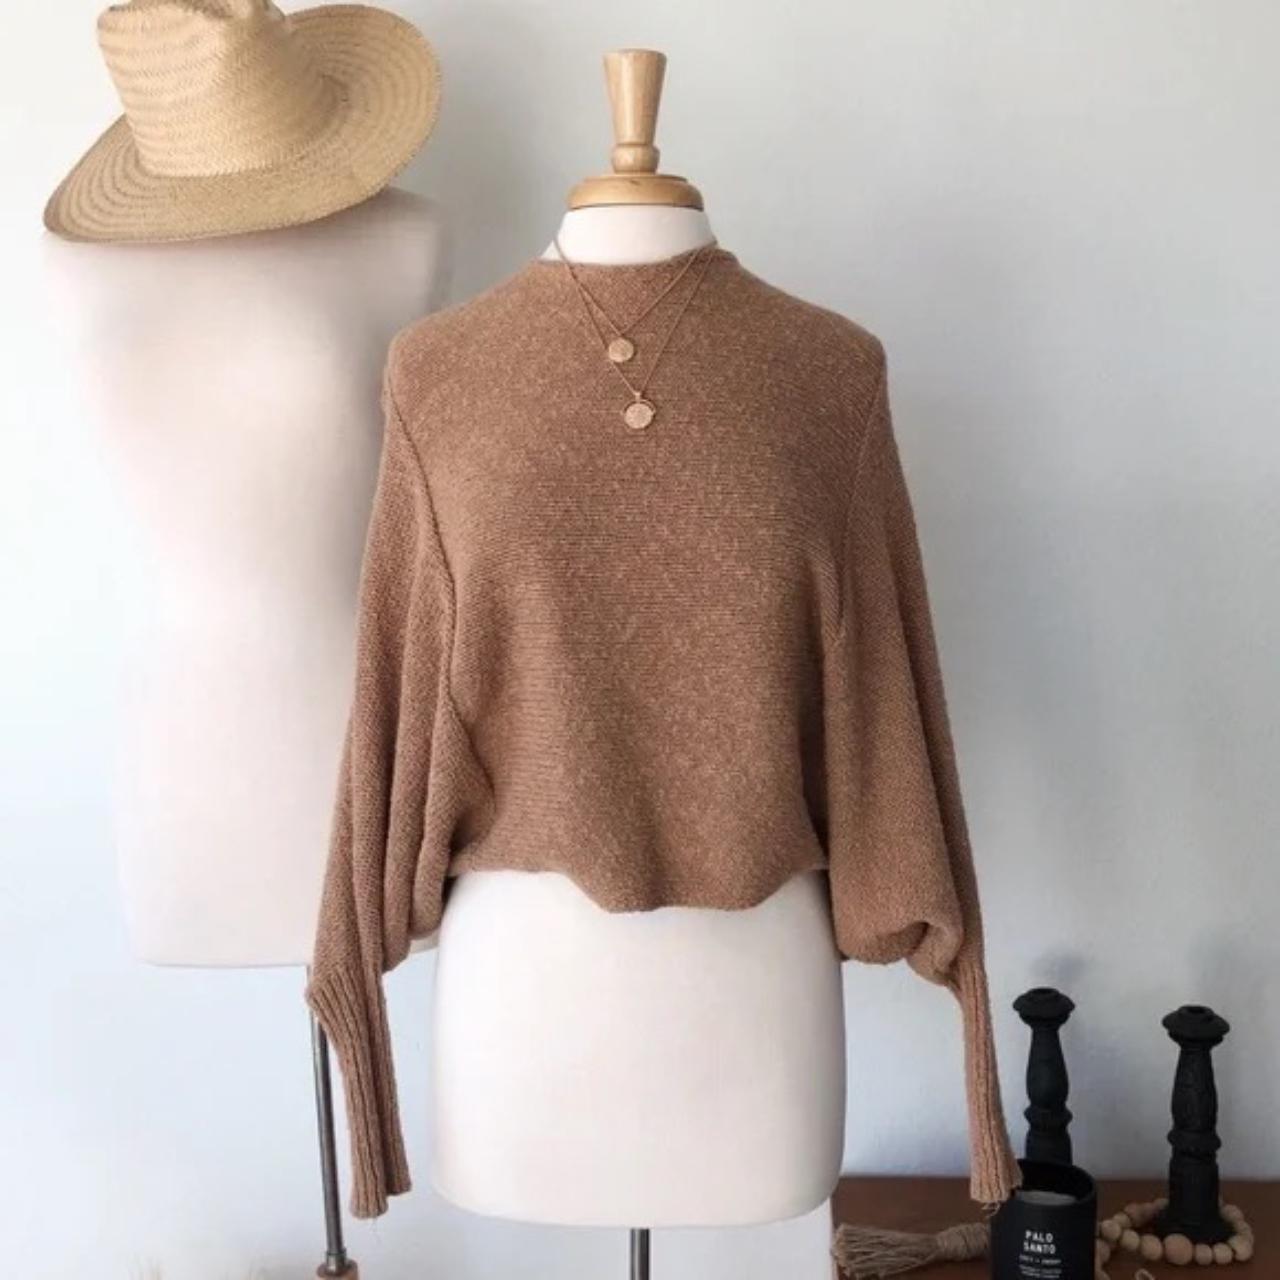 Women's Tan and Brown Blouse